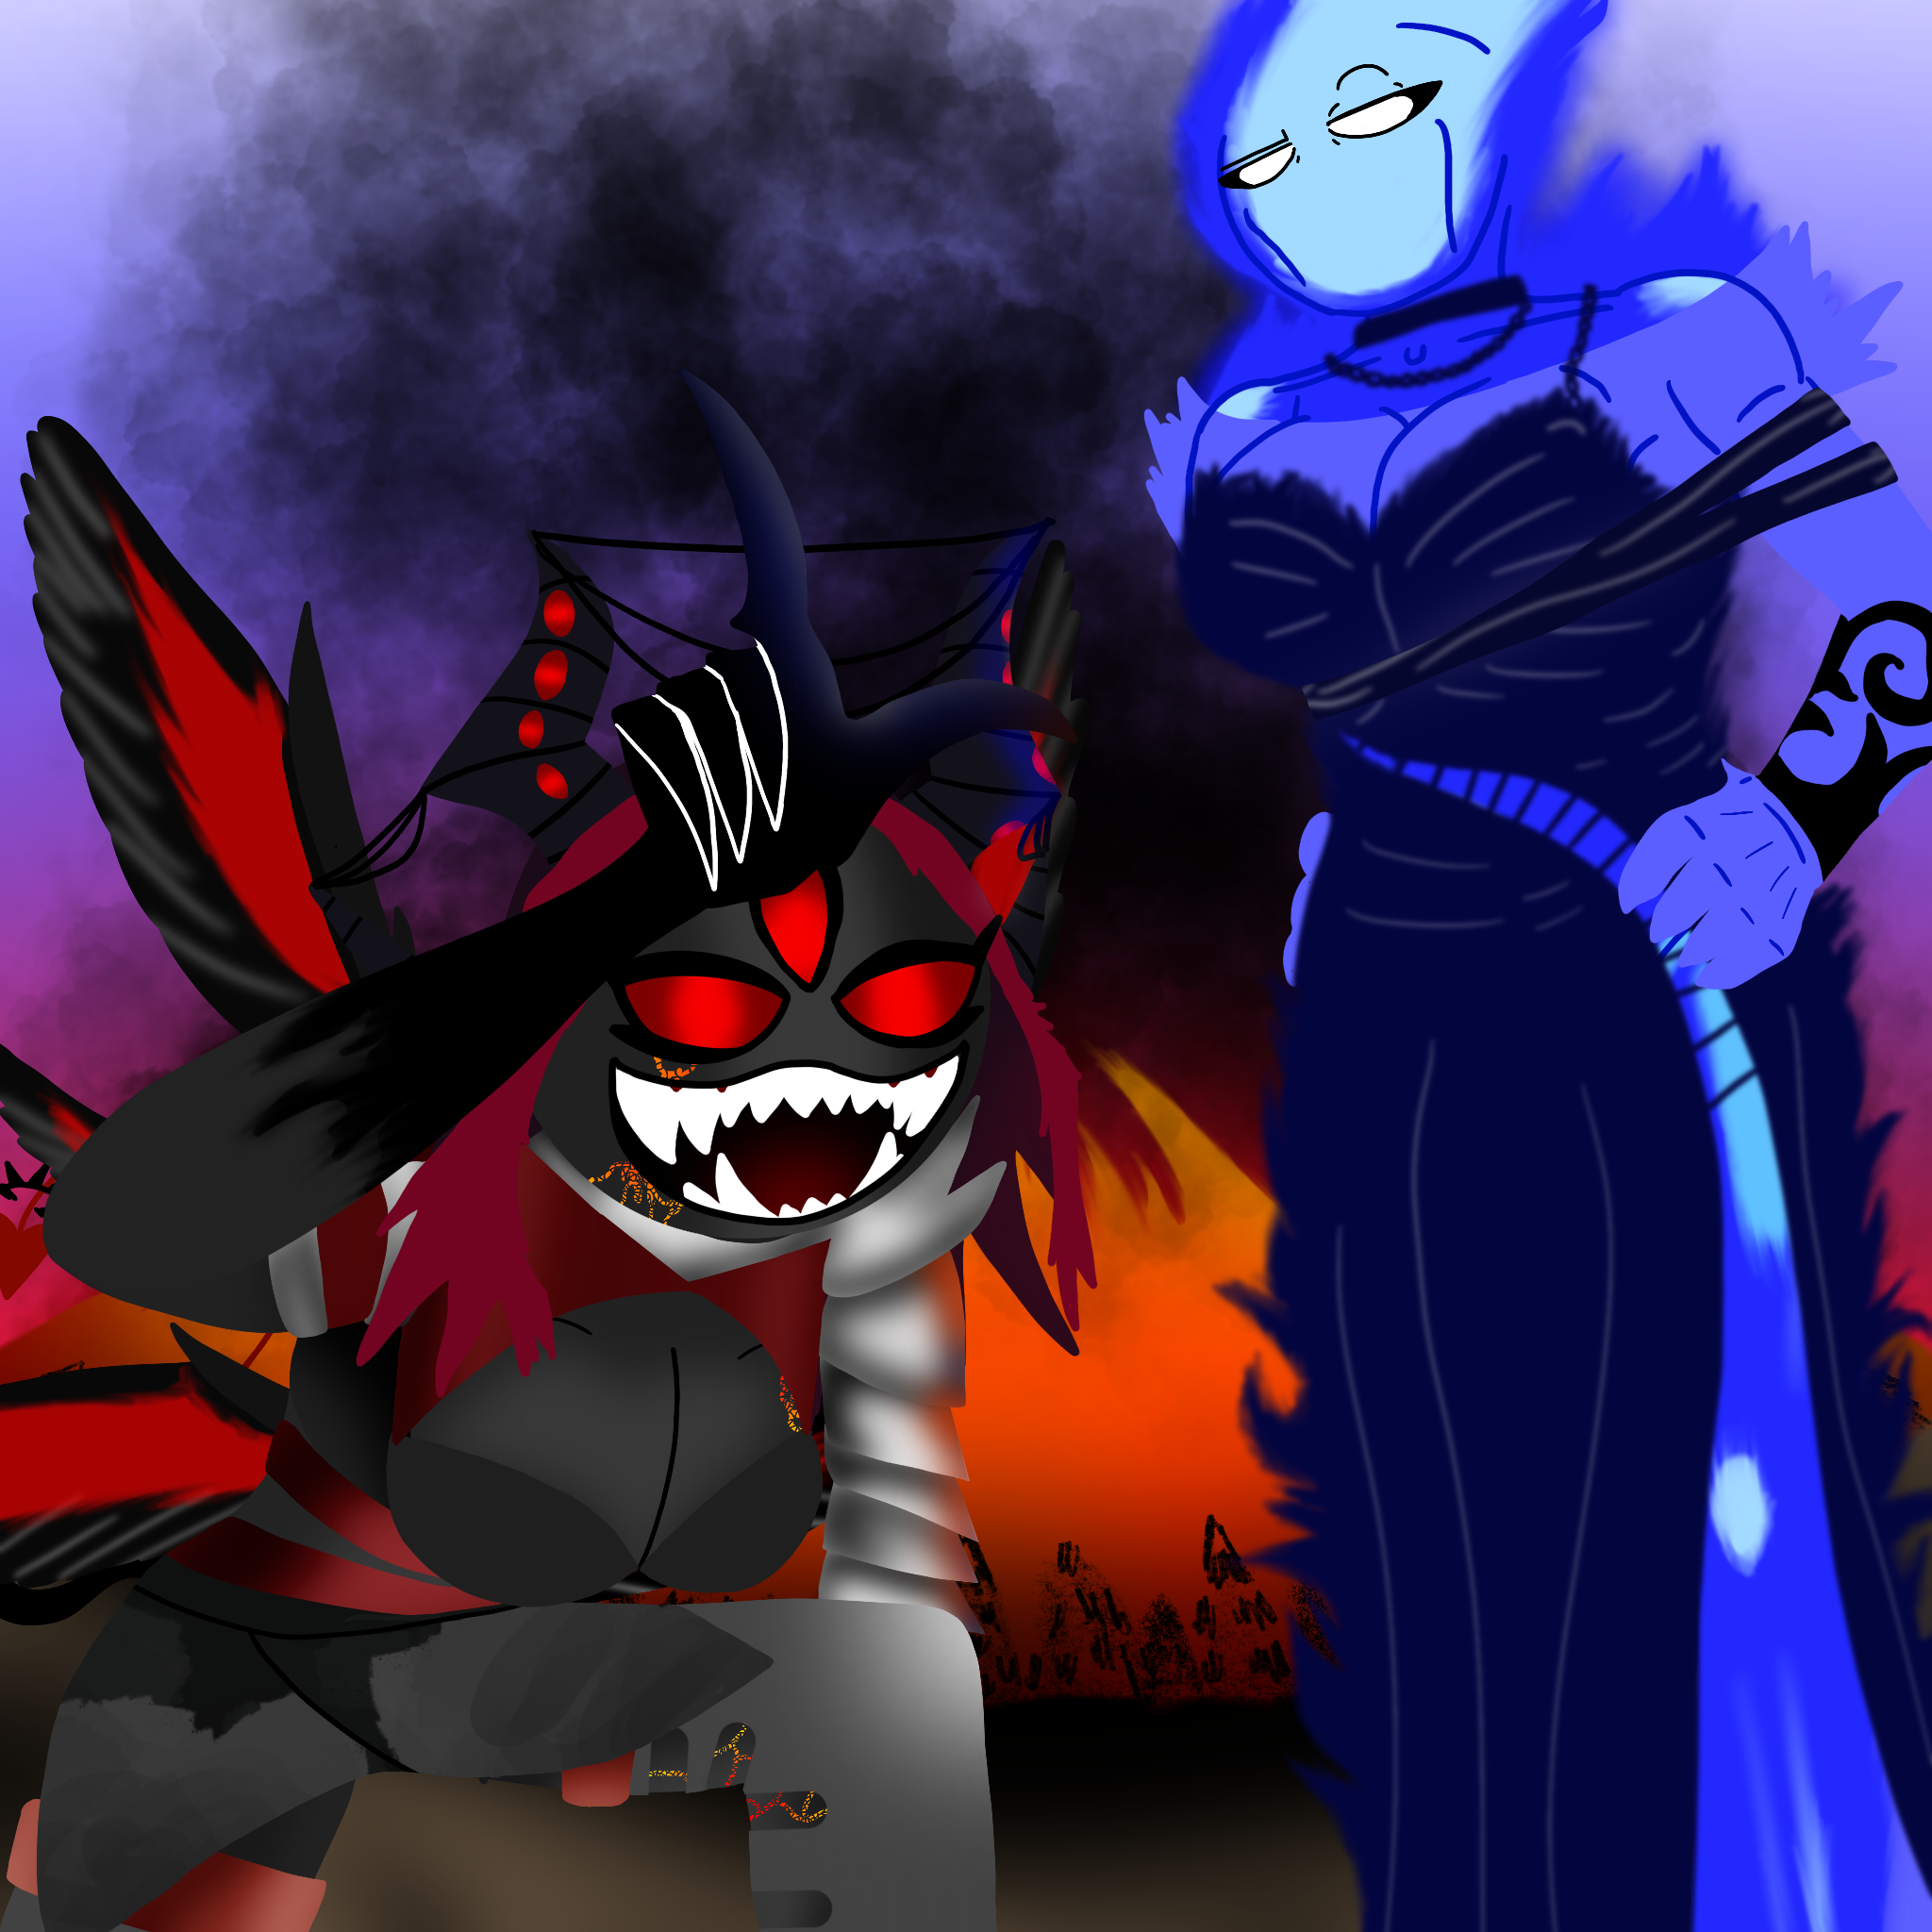 A Demon and a fire woman stand in front of a forest fire